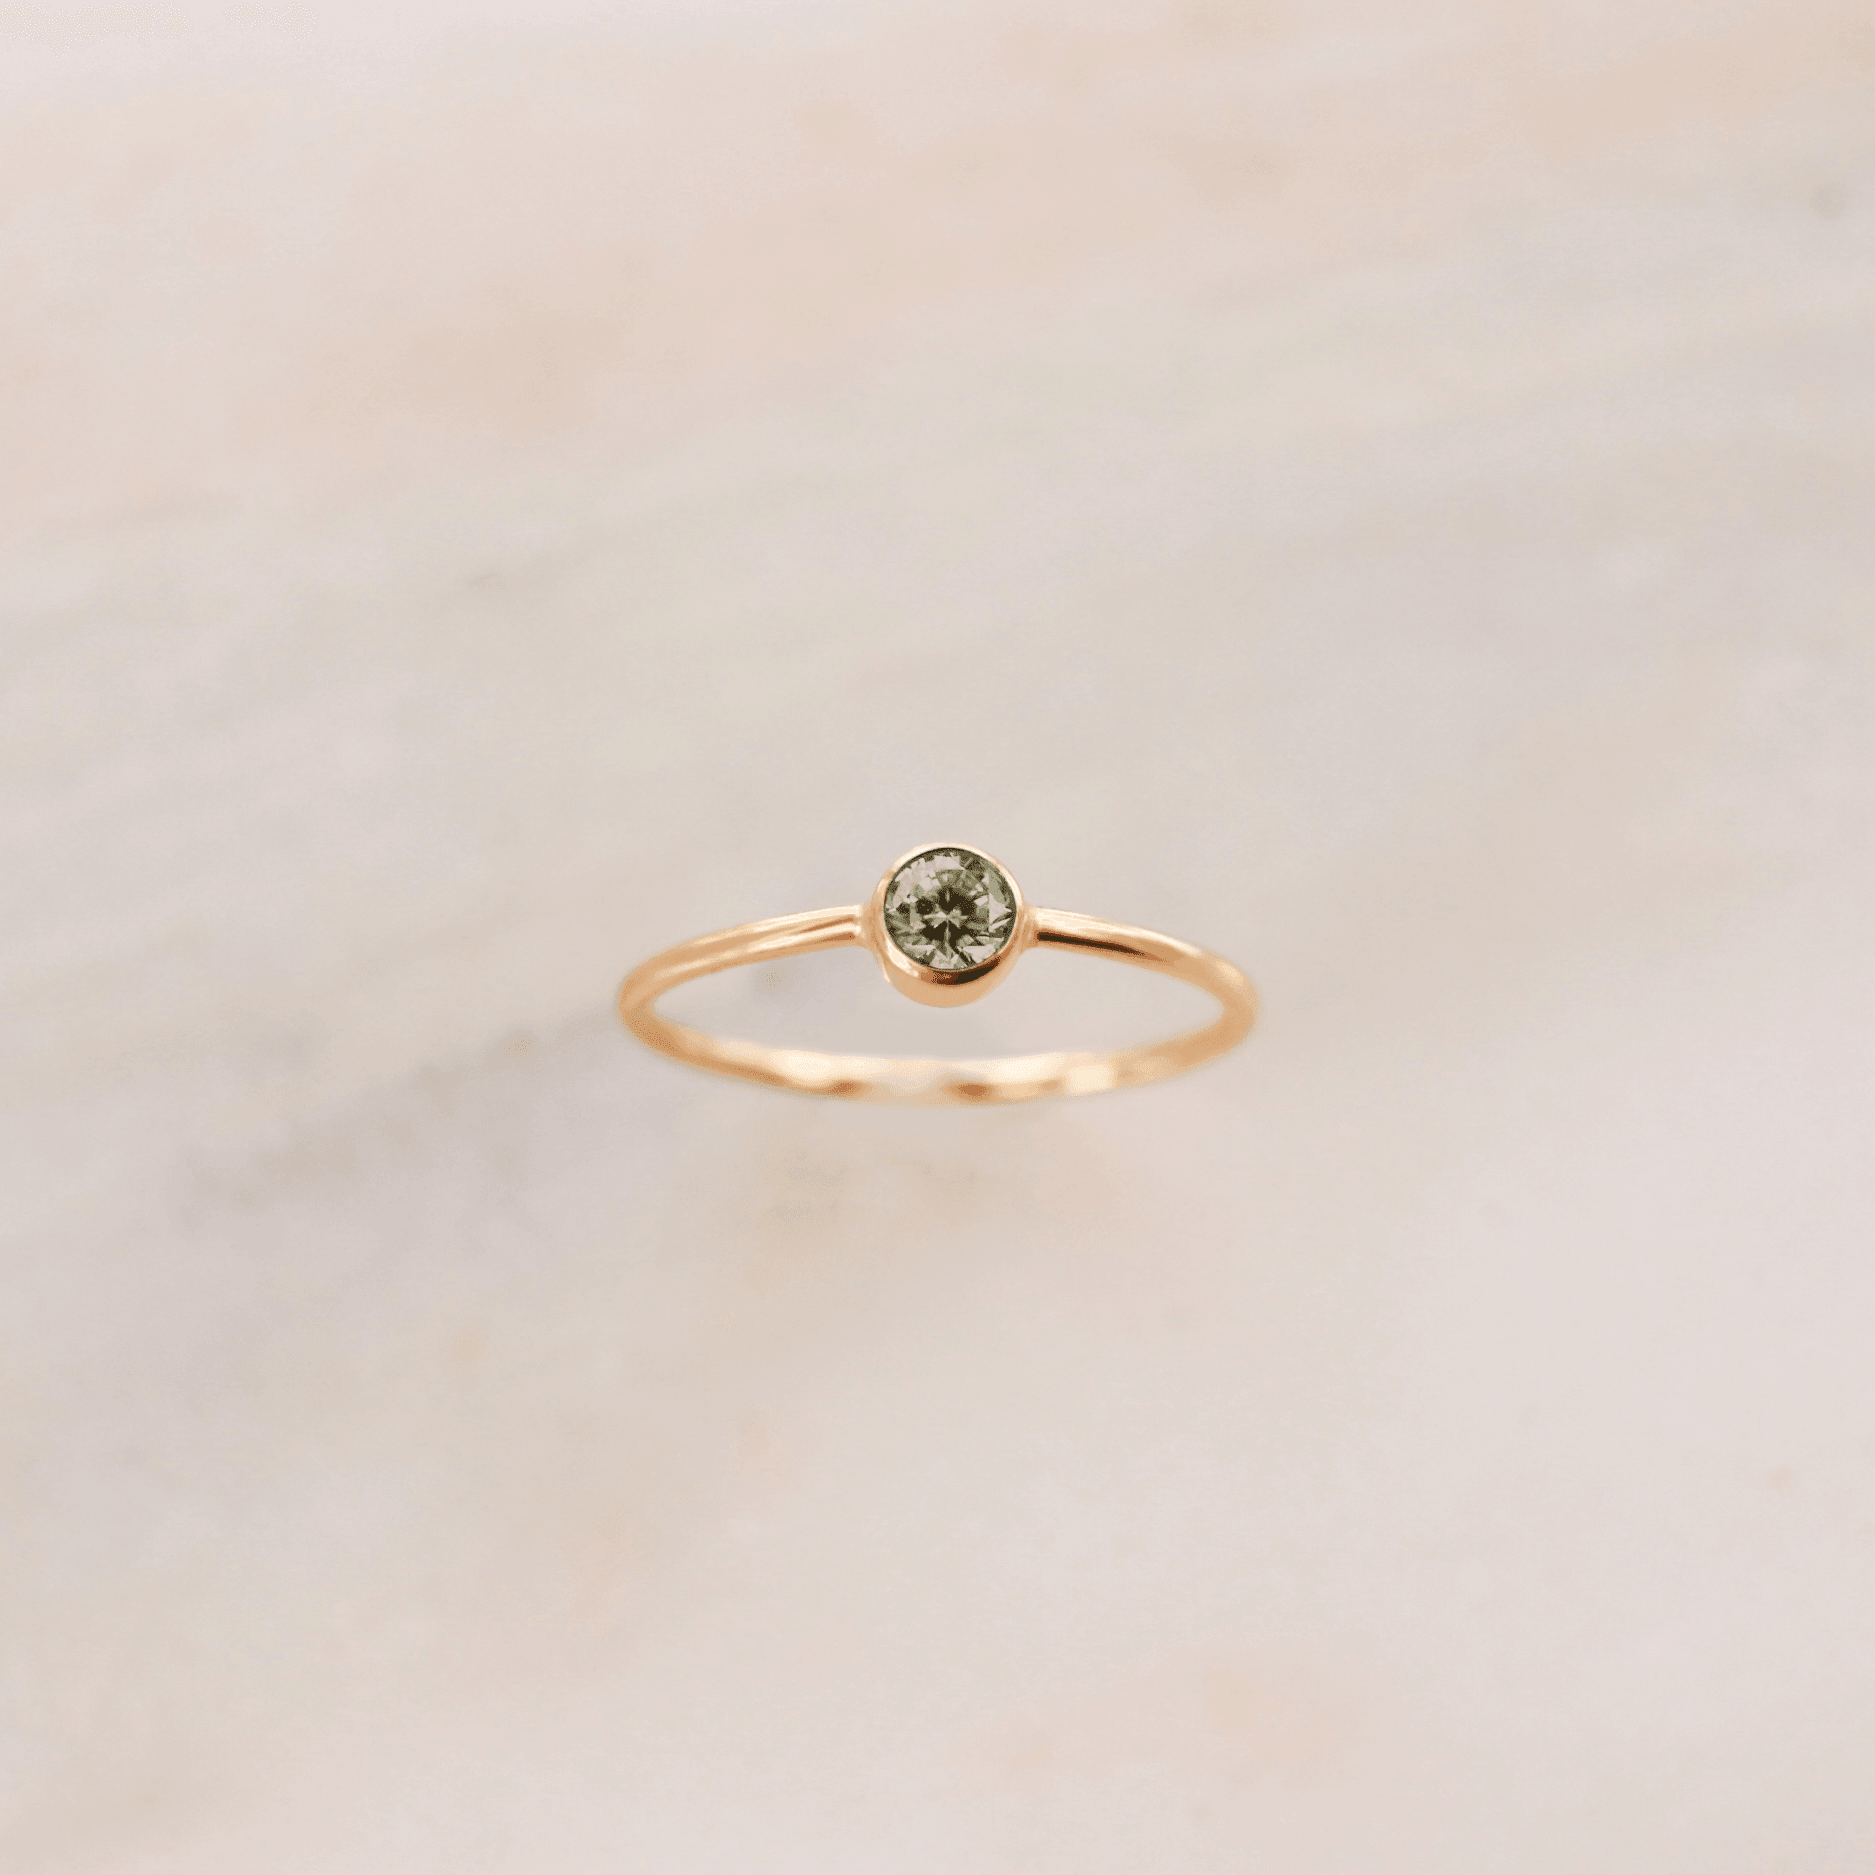 June Birthstone Ring ∙ Alexandrite - Nolia Jewelry - Meaningful + Sustainably Handcrafted Jewelry